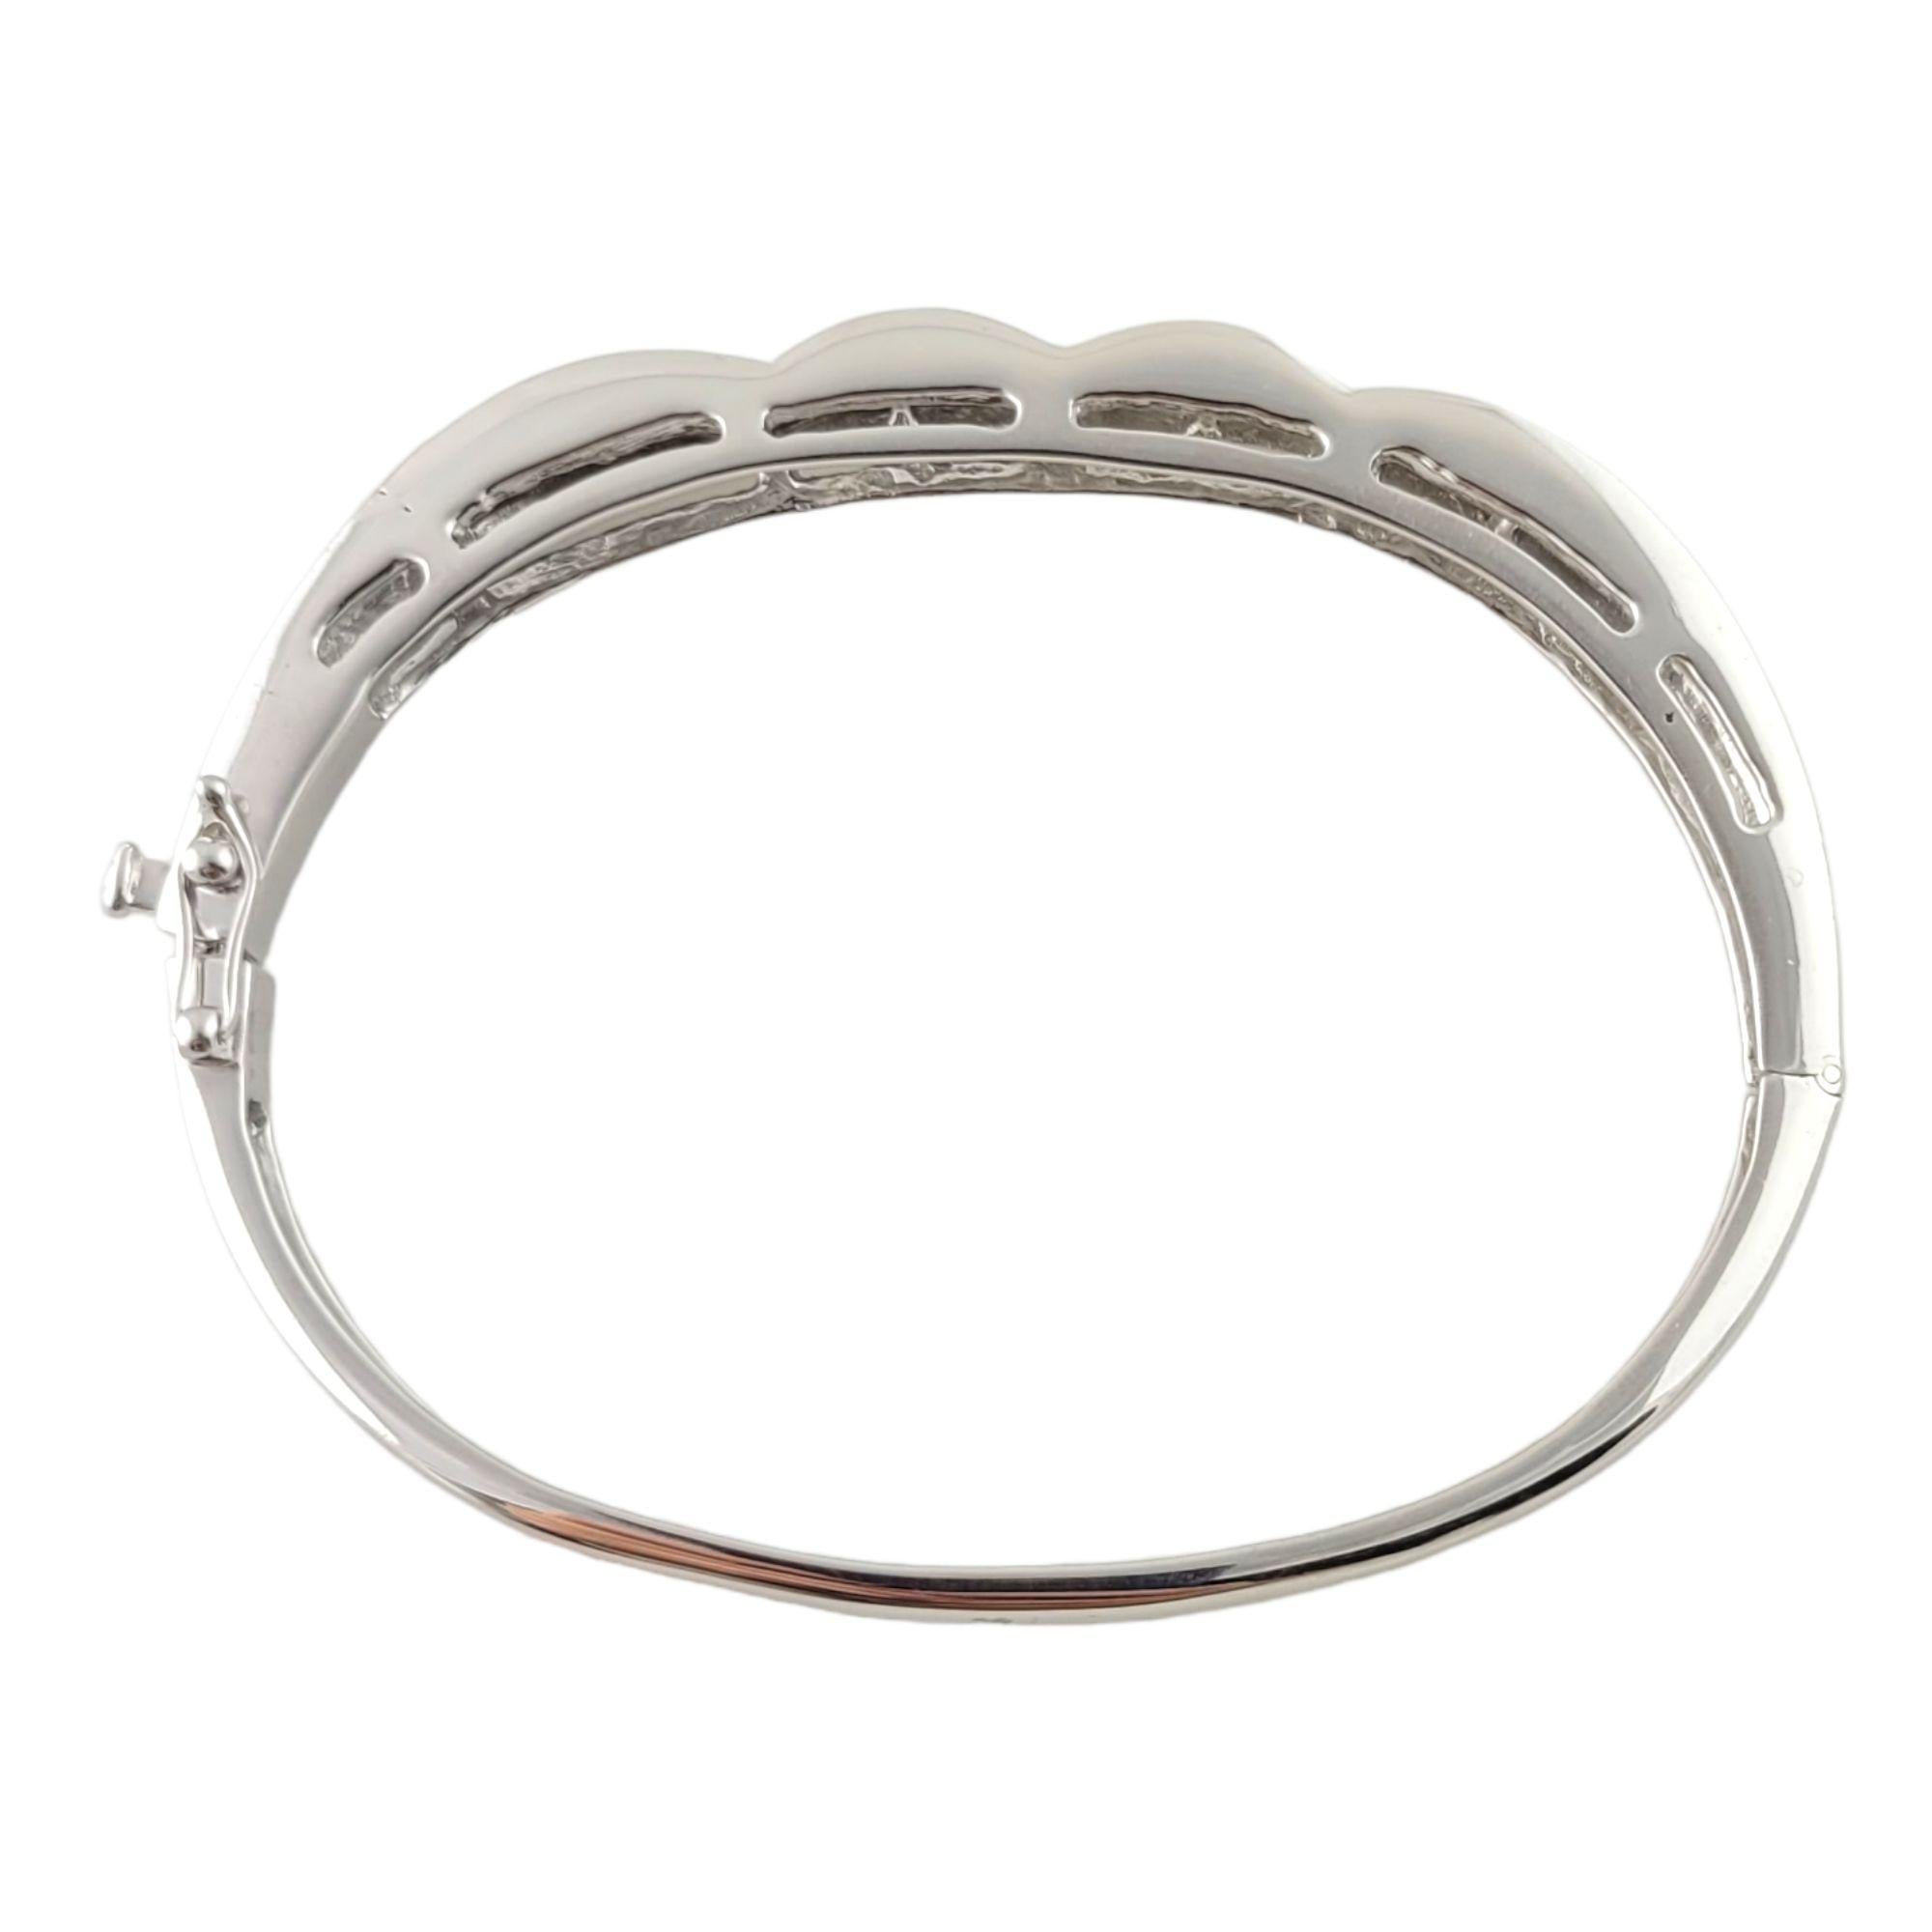 14K White Gold Diamond Bangle Bracelet

This sparkling diamond bangle bracelet is set in 14K white gold.

The front of the bracelet is set with 68 princess cut diamonds totaling approx. 3.40 cts in total diamond weight

Diamond clarity is